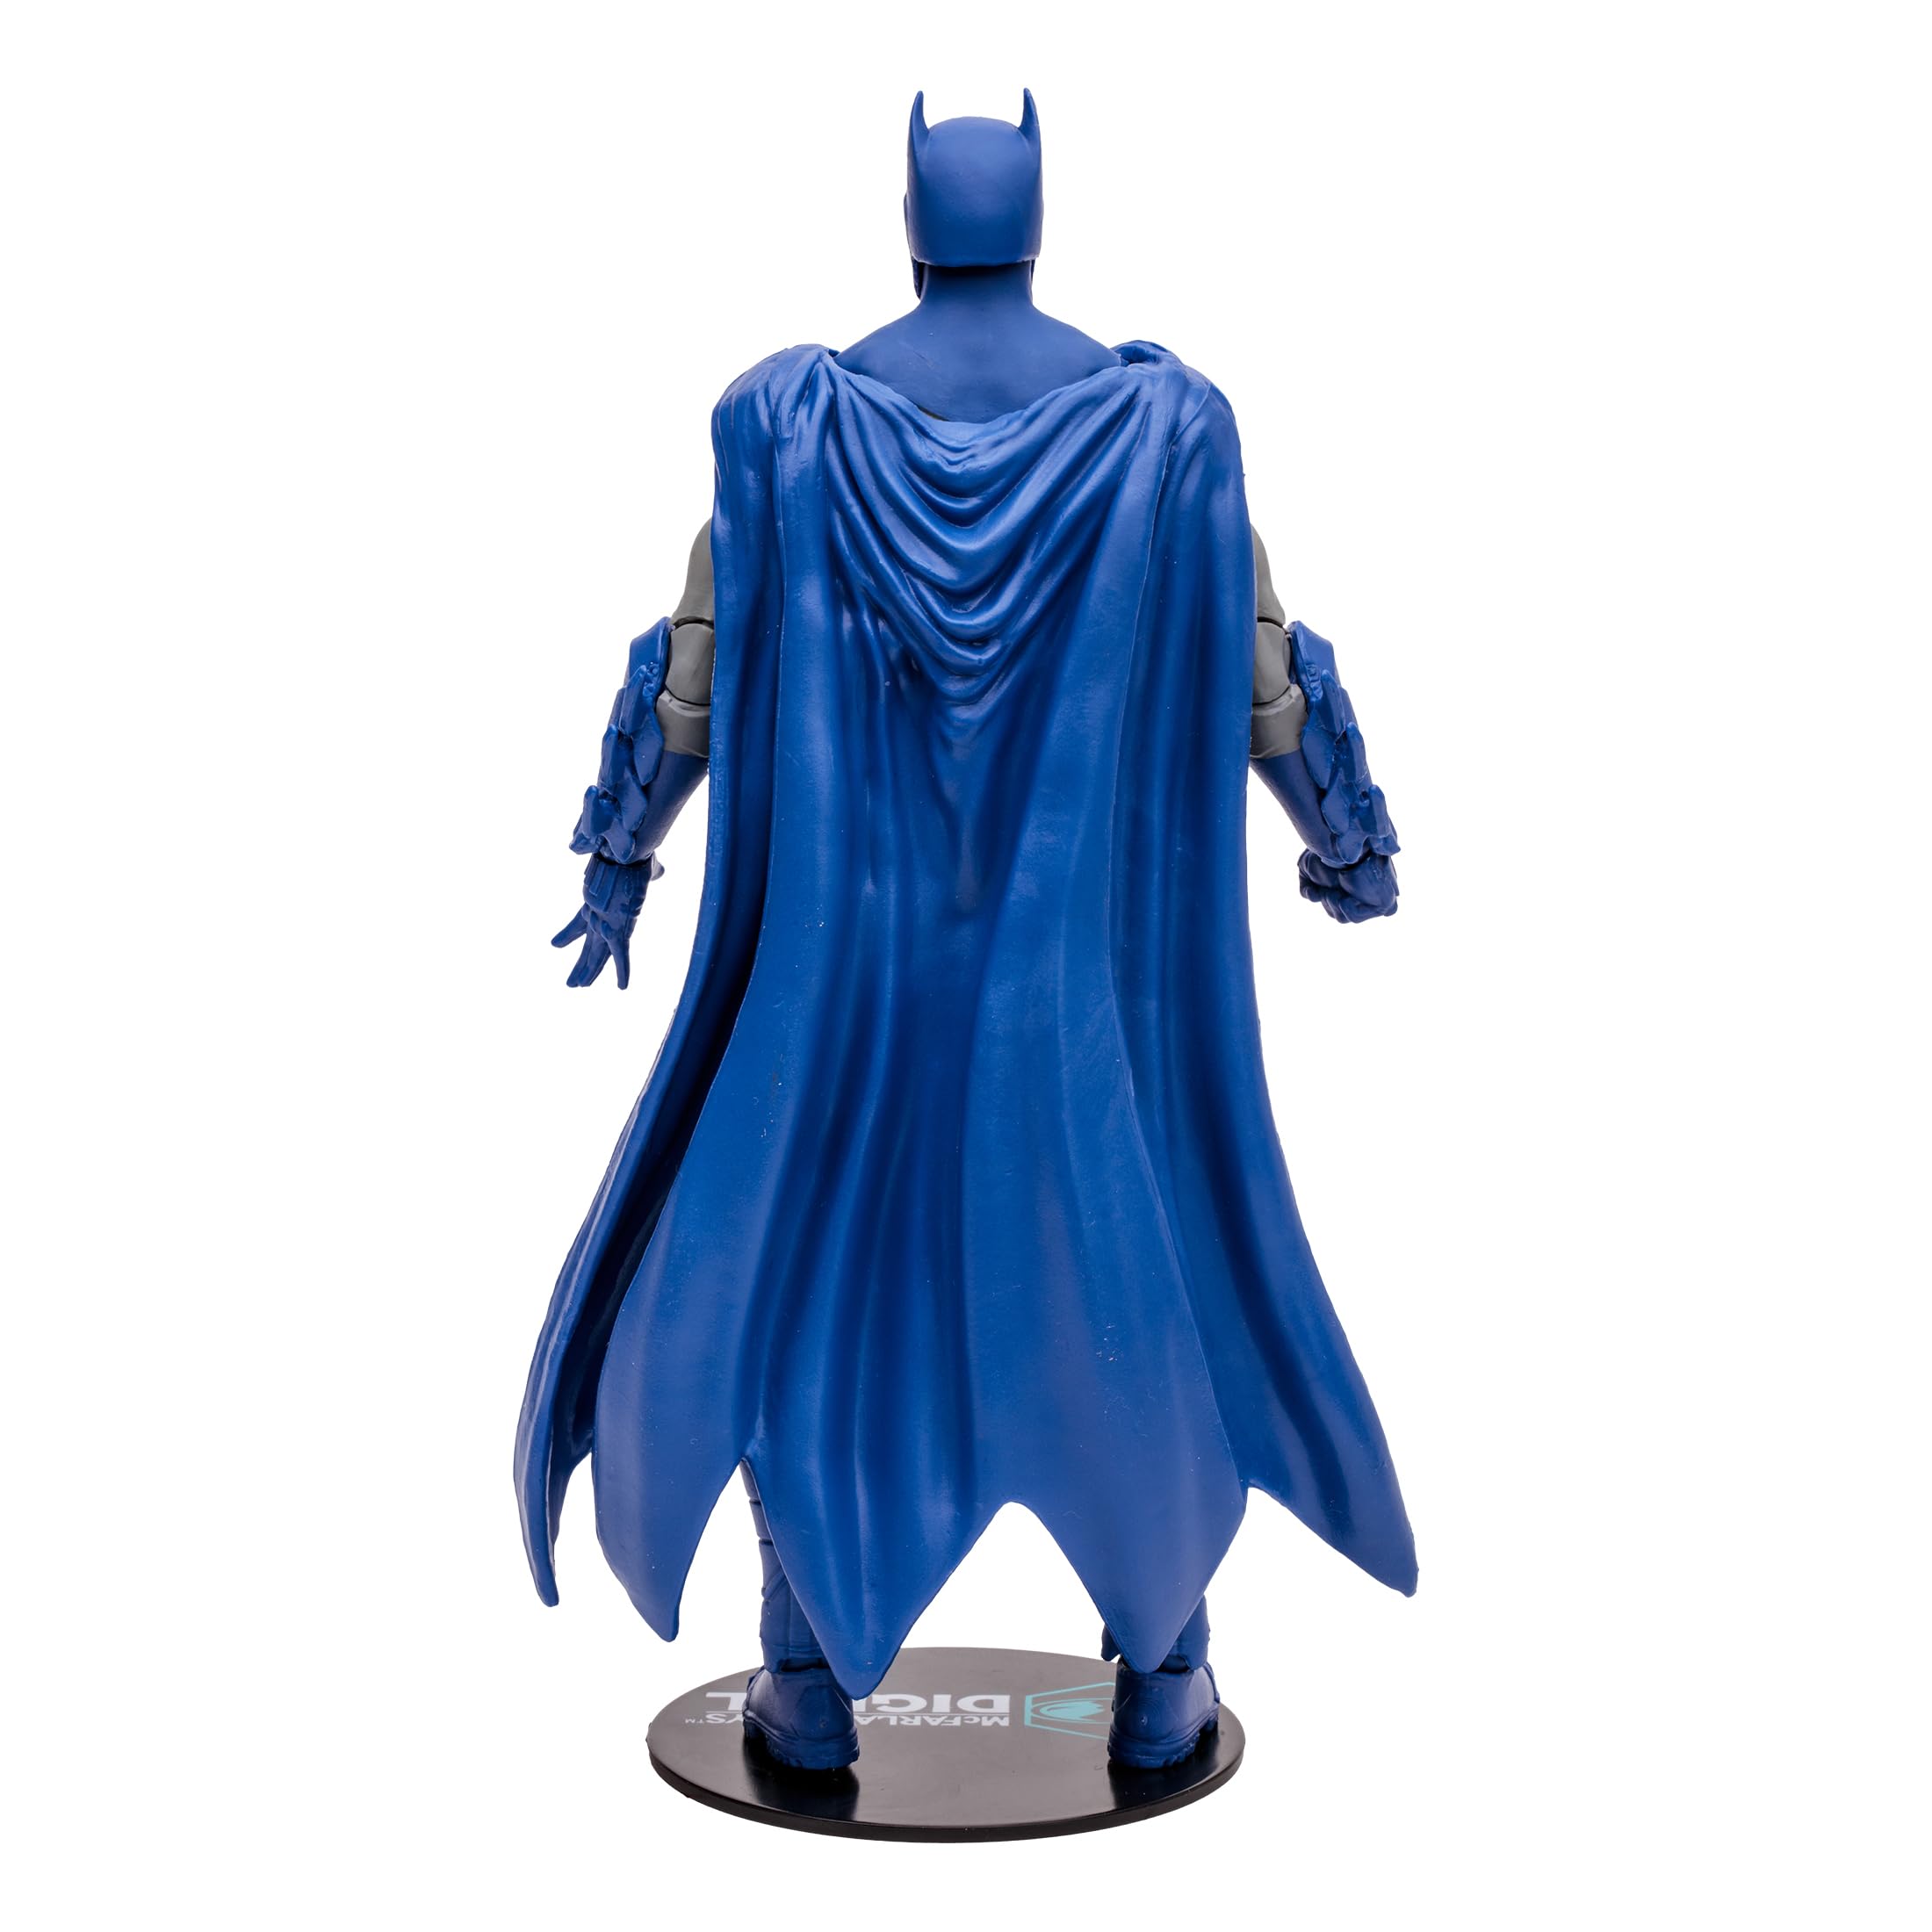 McFarlane Toys - DC Direct Batman (DC Rebirth) 7in Action Figure with Digital Collectible